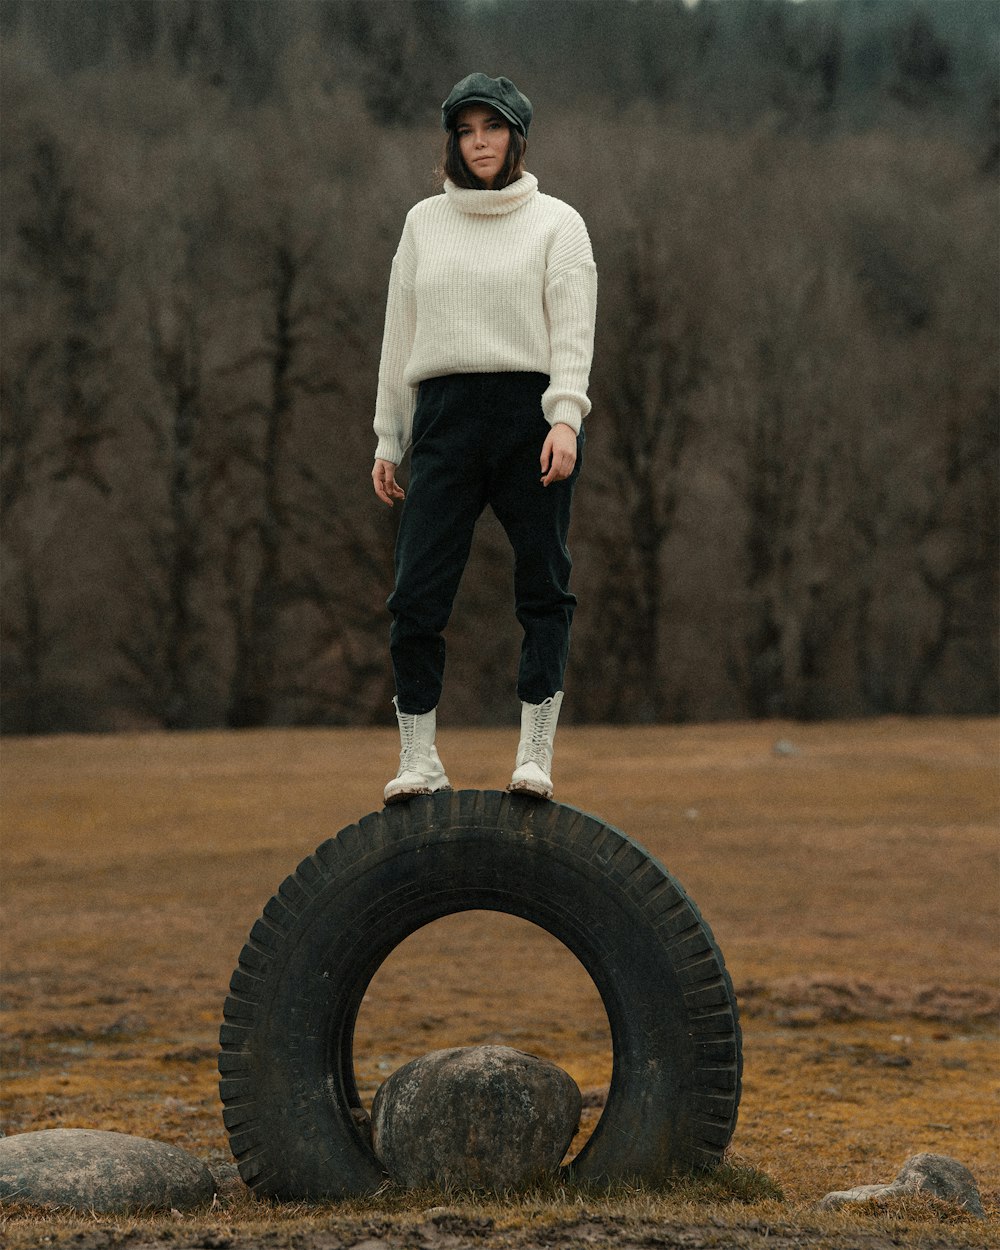 man in white sweater and black pants standing on black wheel